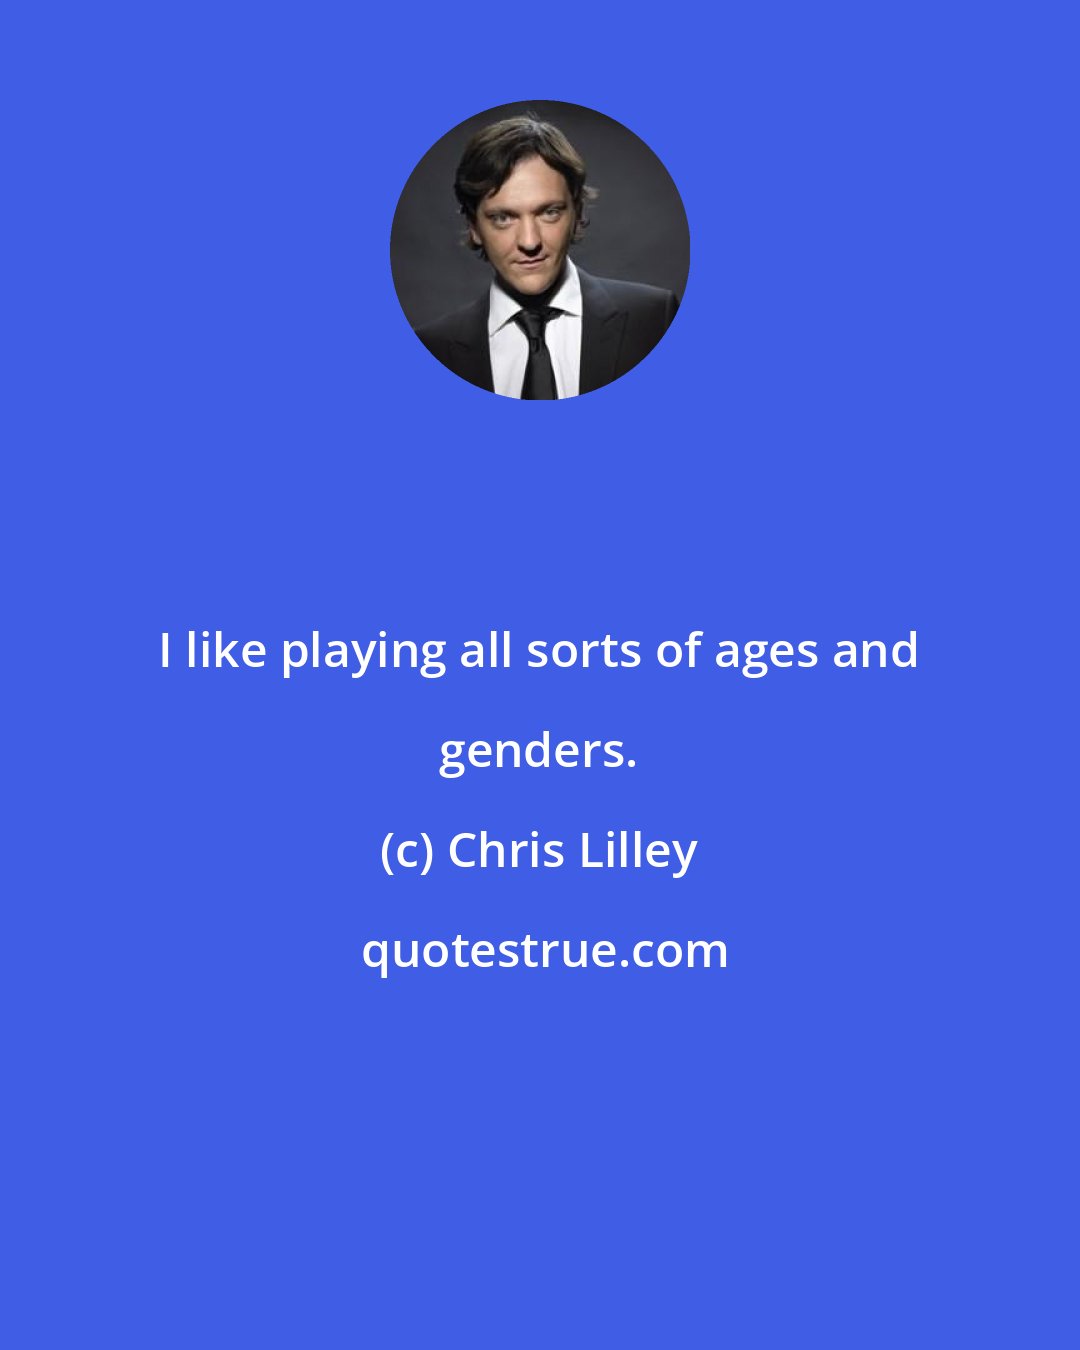 Chris Lilley: I like playing all sorts of ages and genders.